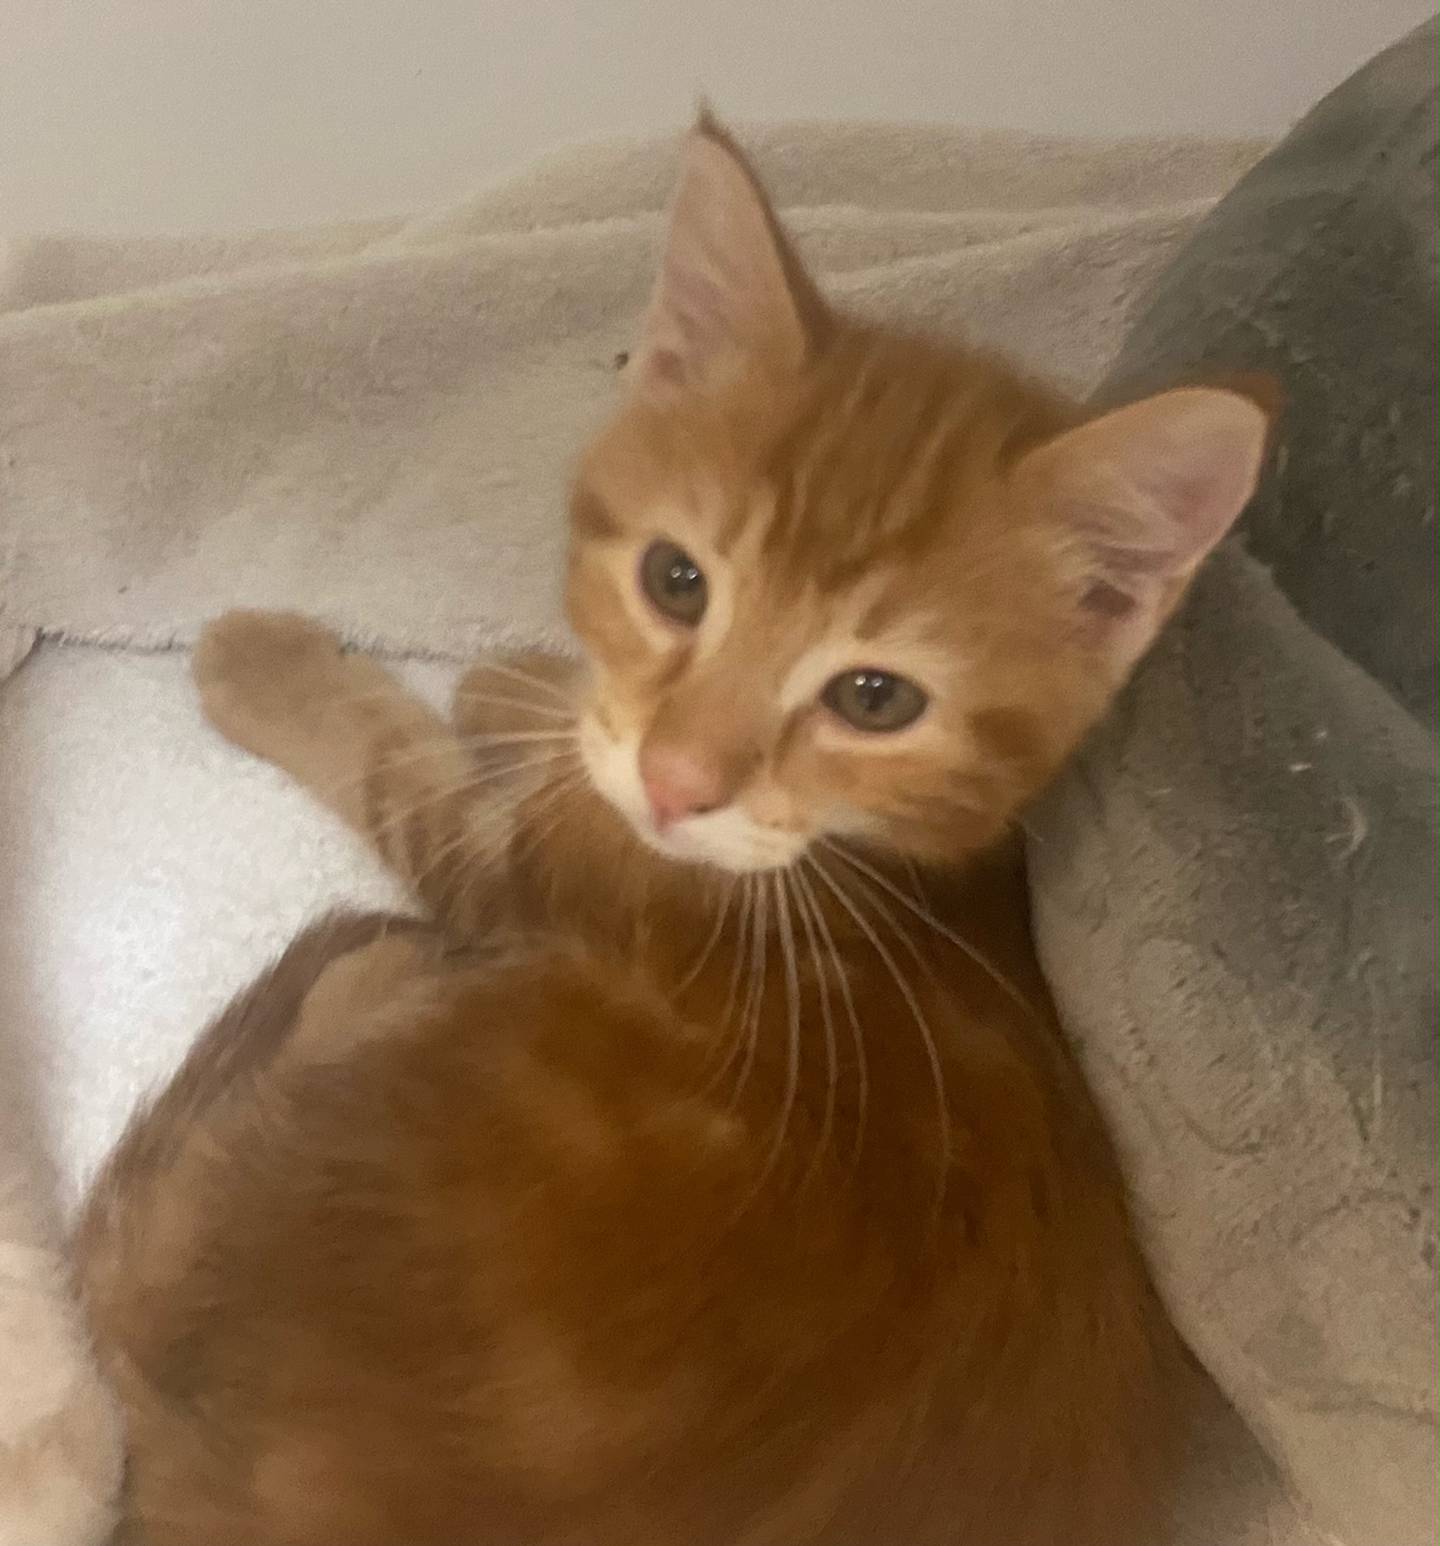 Butterfinger is a 3-month-old domestic shorthair. He is energetic and loving. Butterfinger is very outgoing and playful. For more information on Butterfinger, including adoption fees please visit justanimals.org or call 815-448-2510.